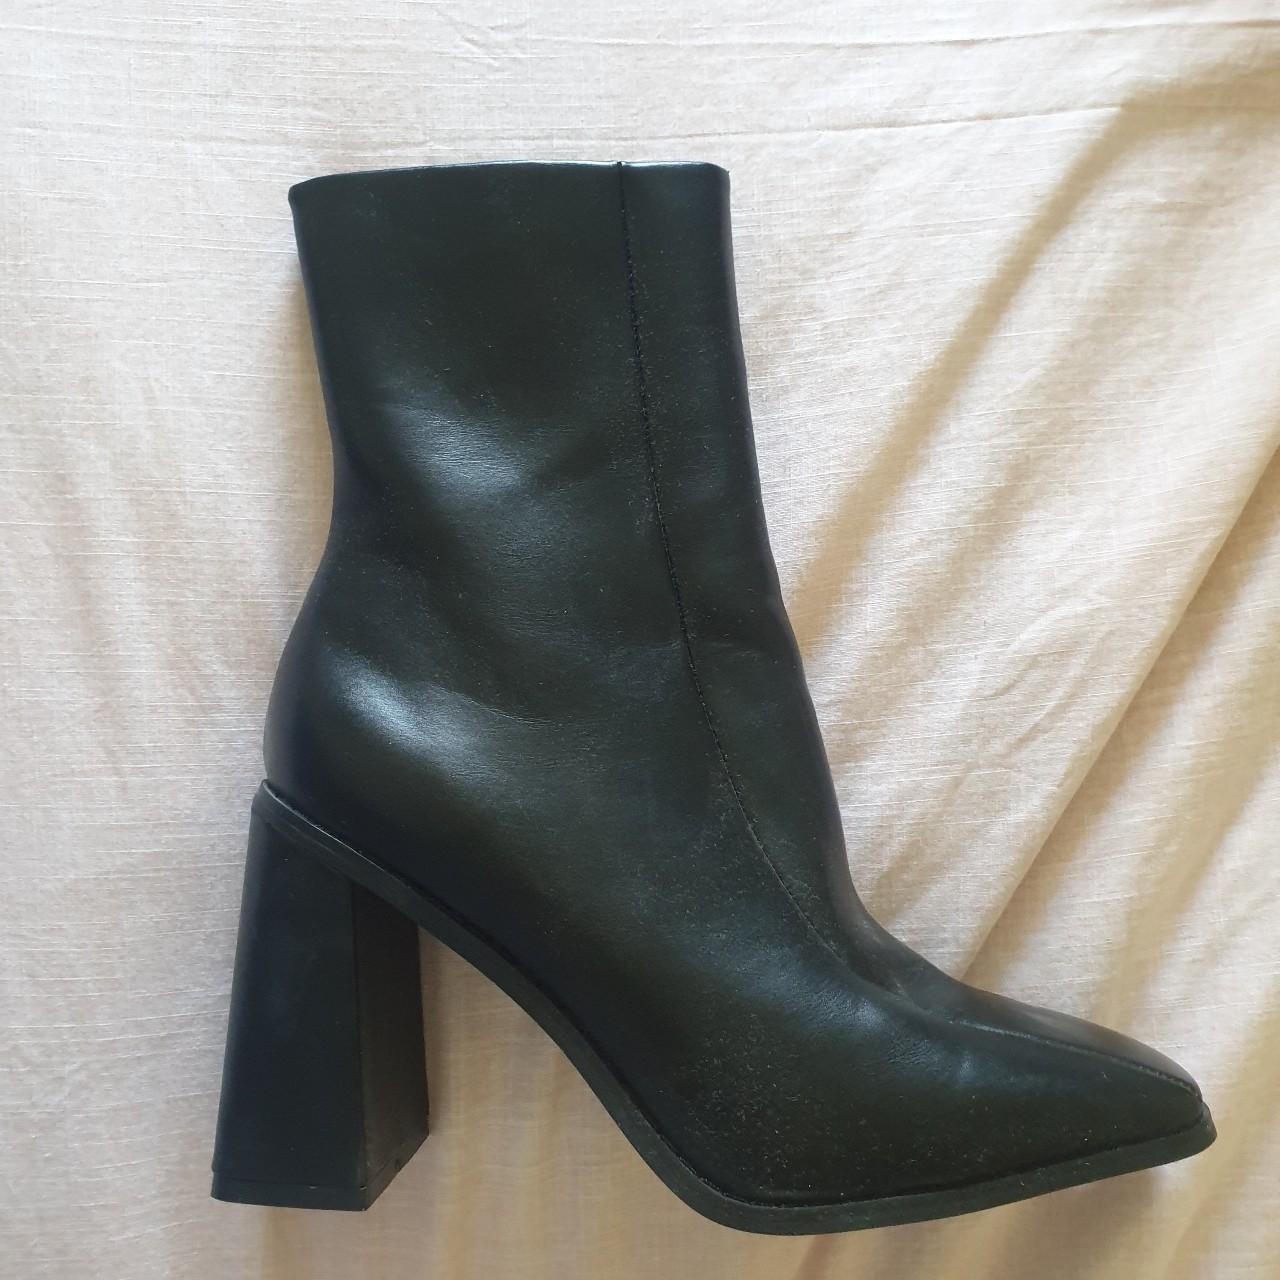 Black ankle Cow-tow block heel boots LOVE THEM SO... - Depop